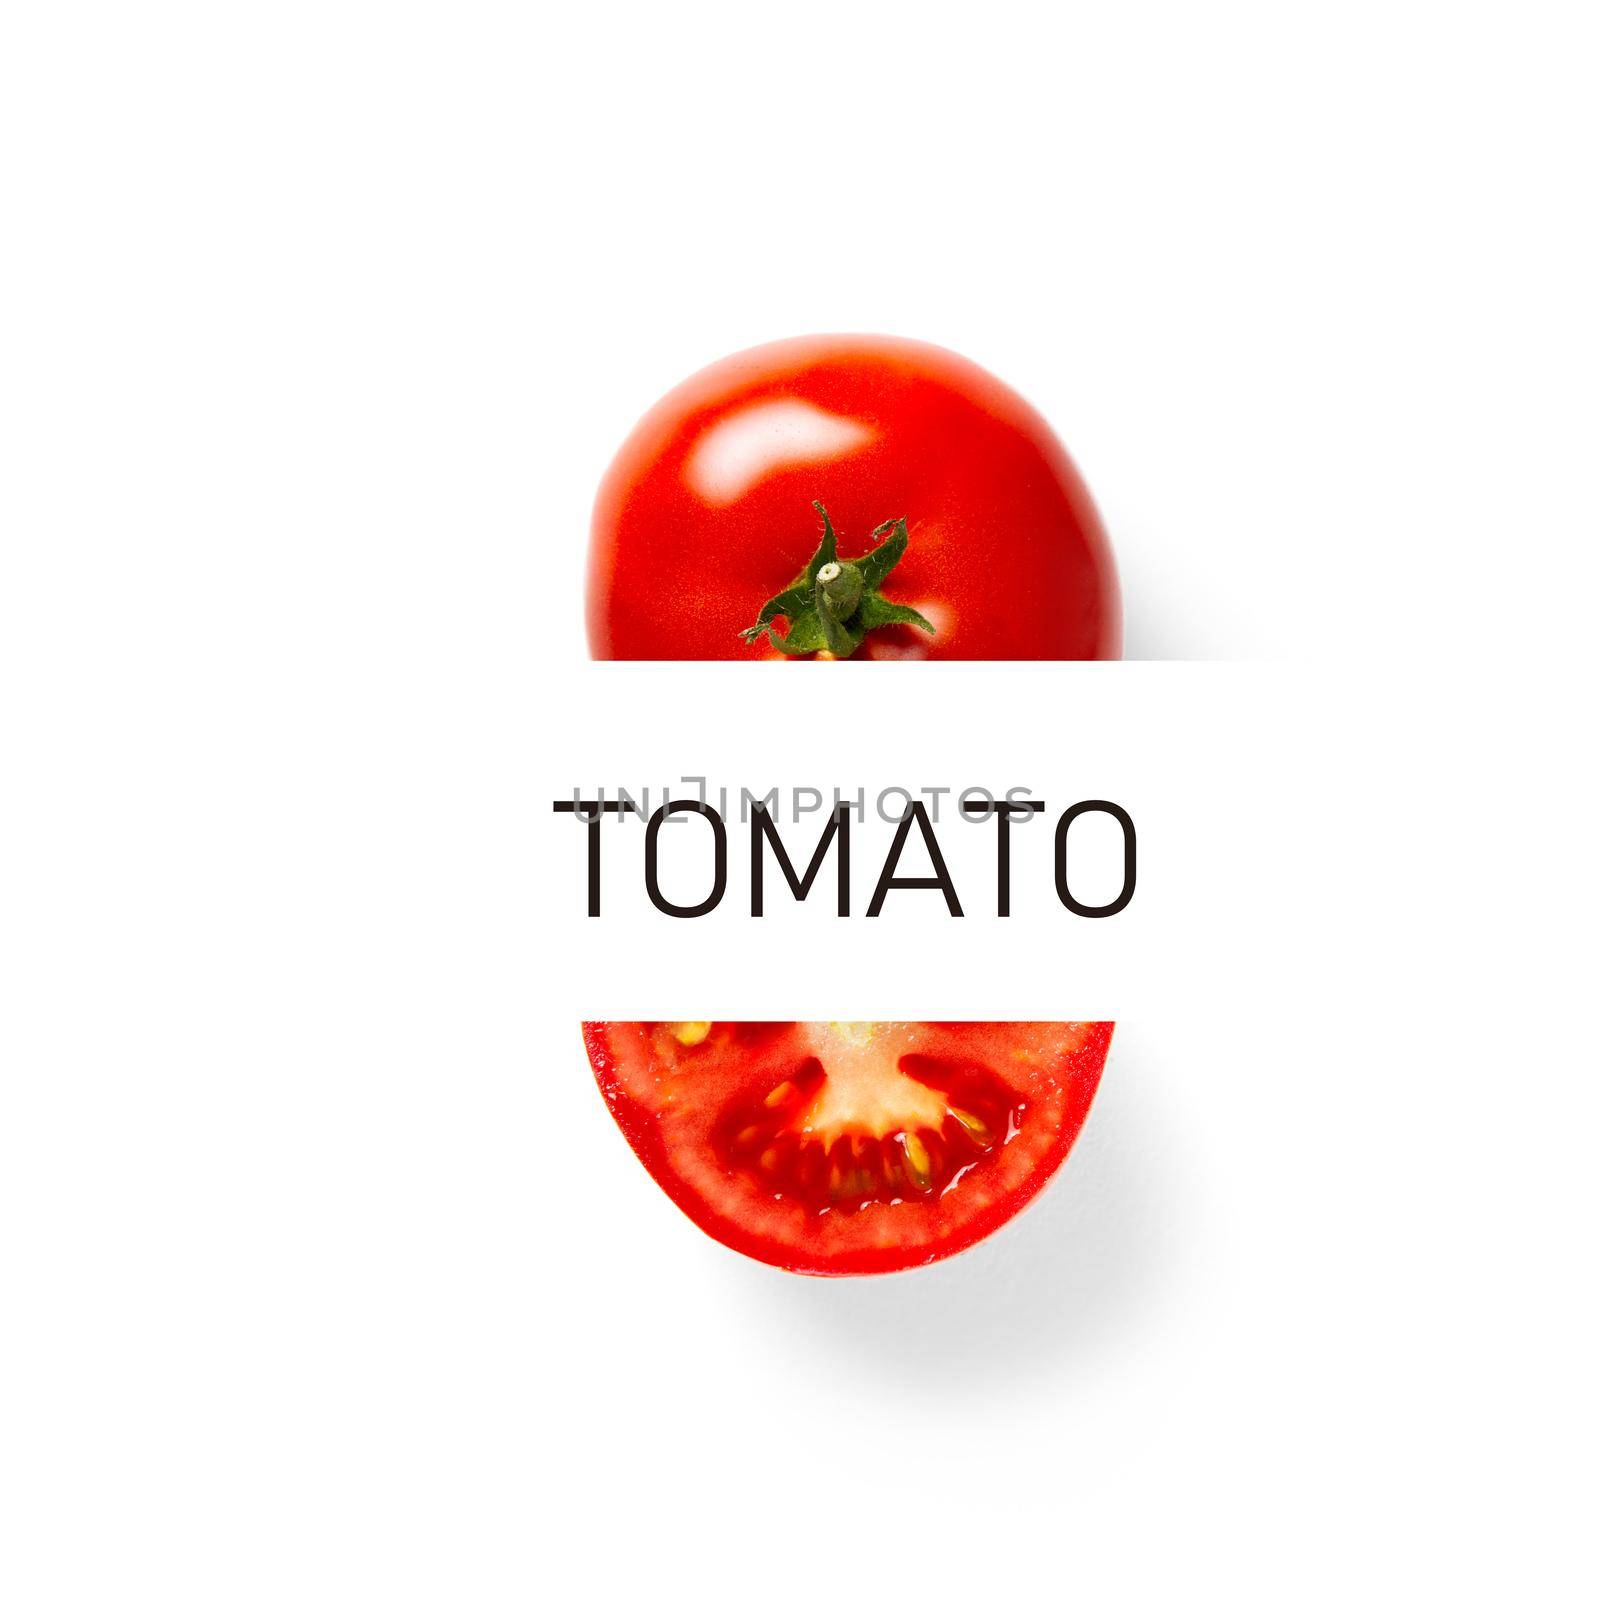 Tomato creative layout and composition isolated on white background. Food, healthy eating and dieting concept.